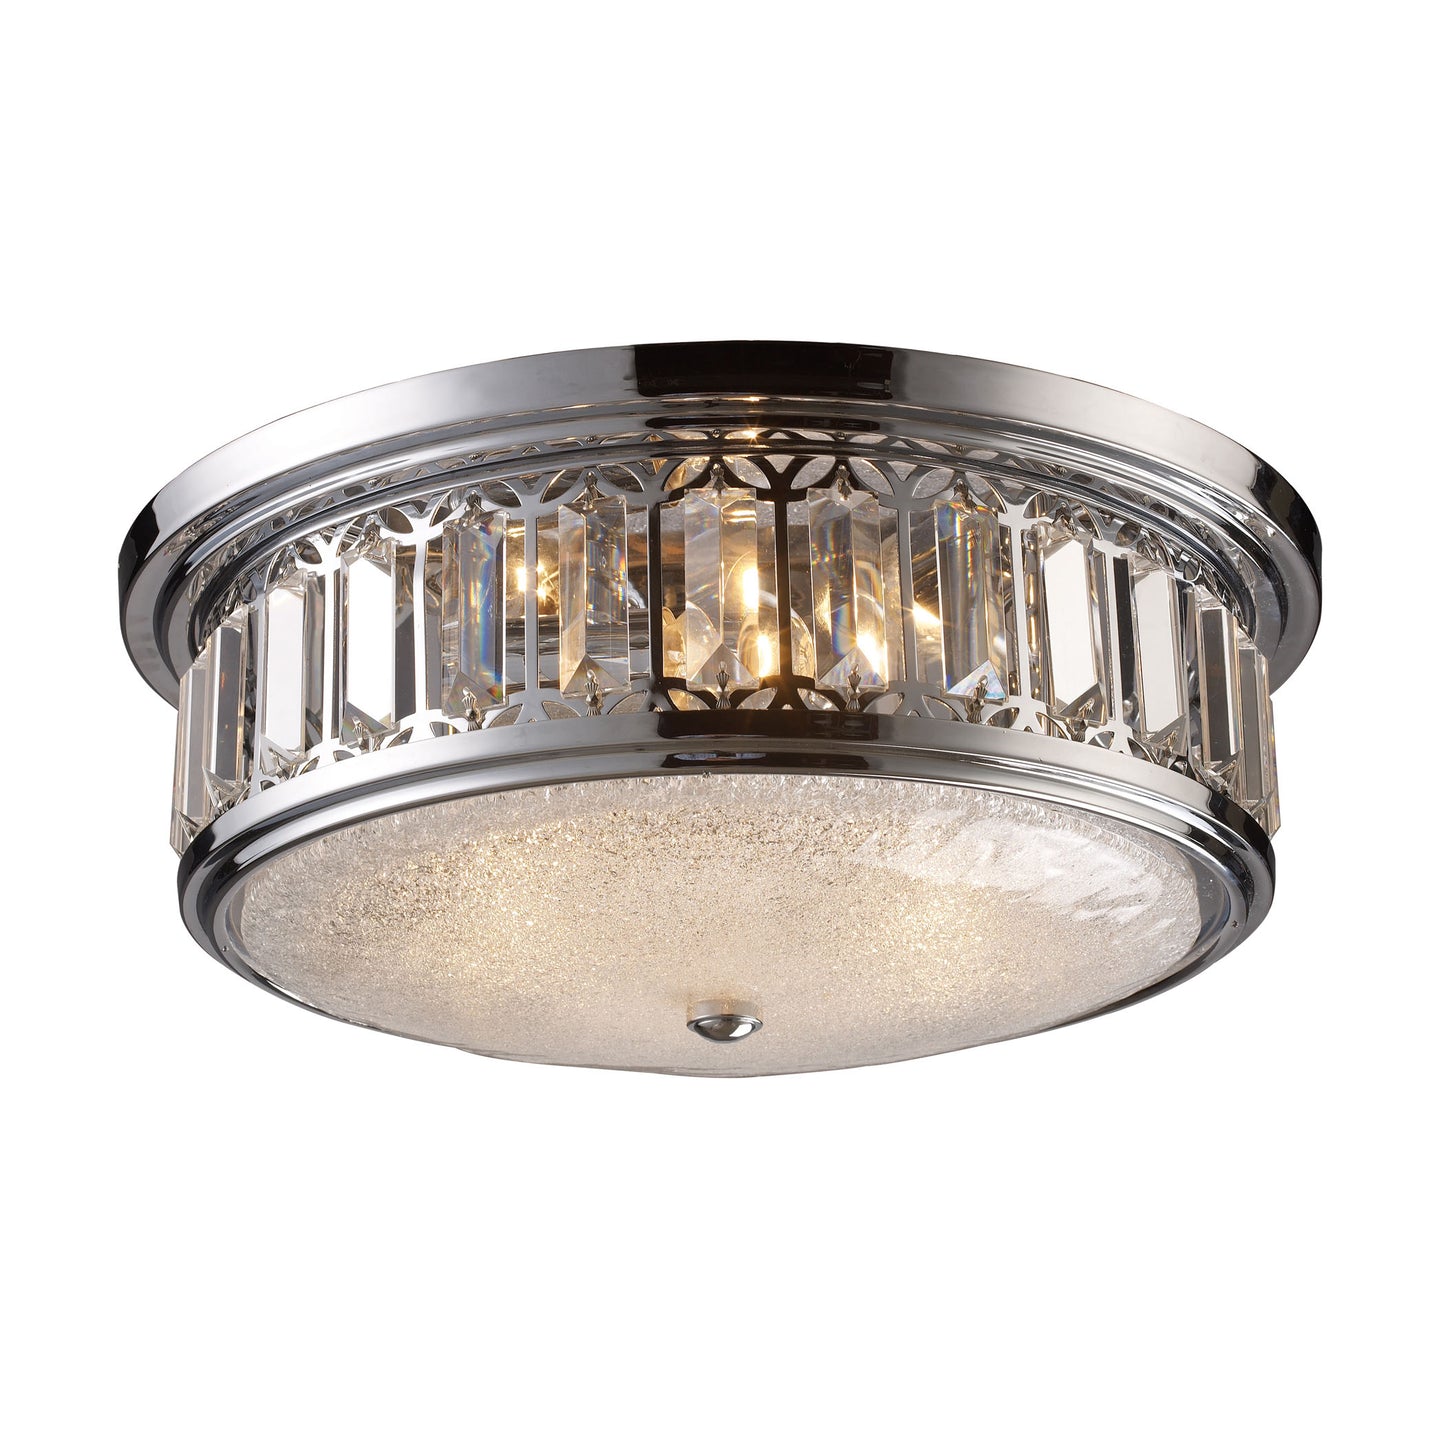 ELK Lighting 11227/3 - Flushmounts 16" Wide 3-Light Flush Mount in Polished Chrome with Glass and Cr